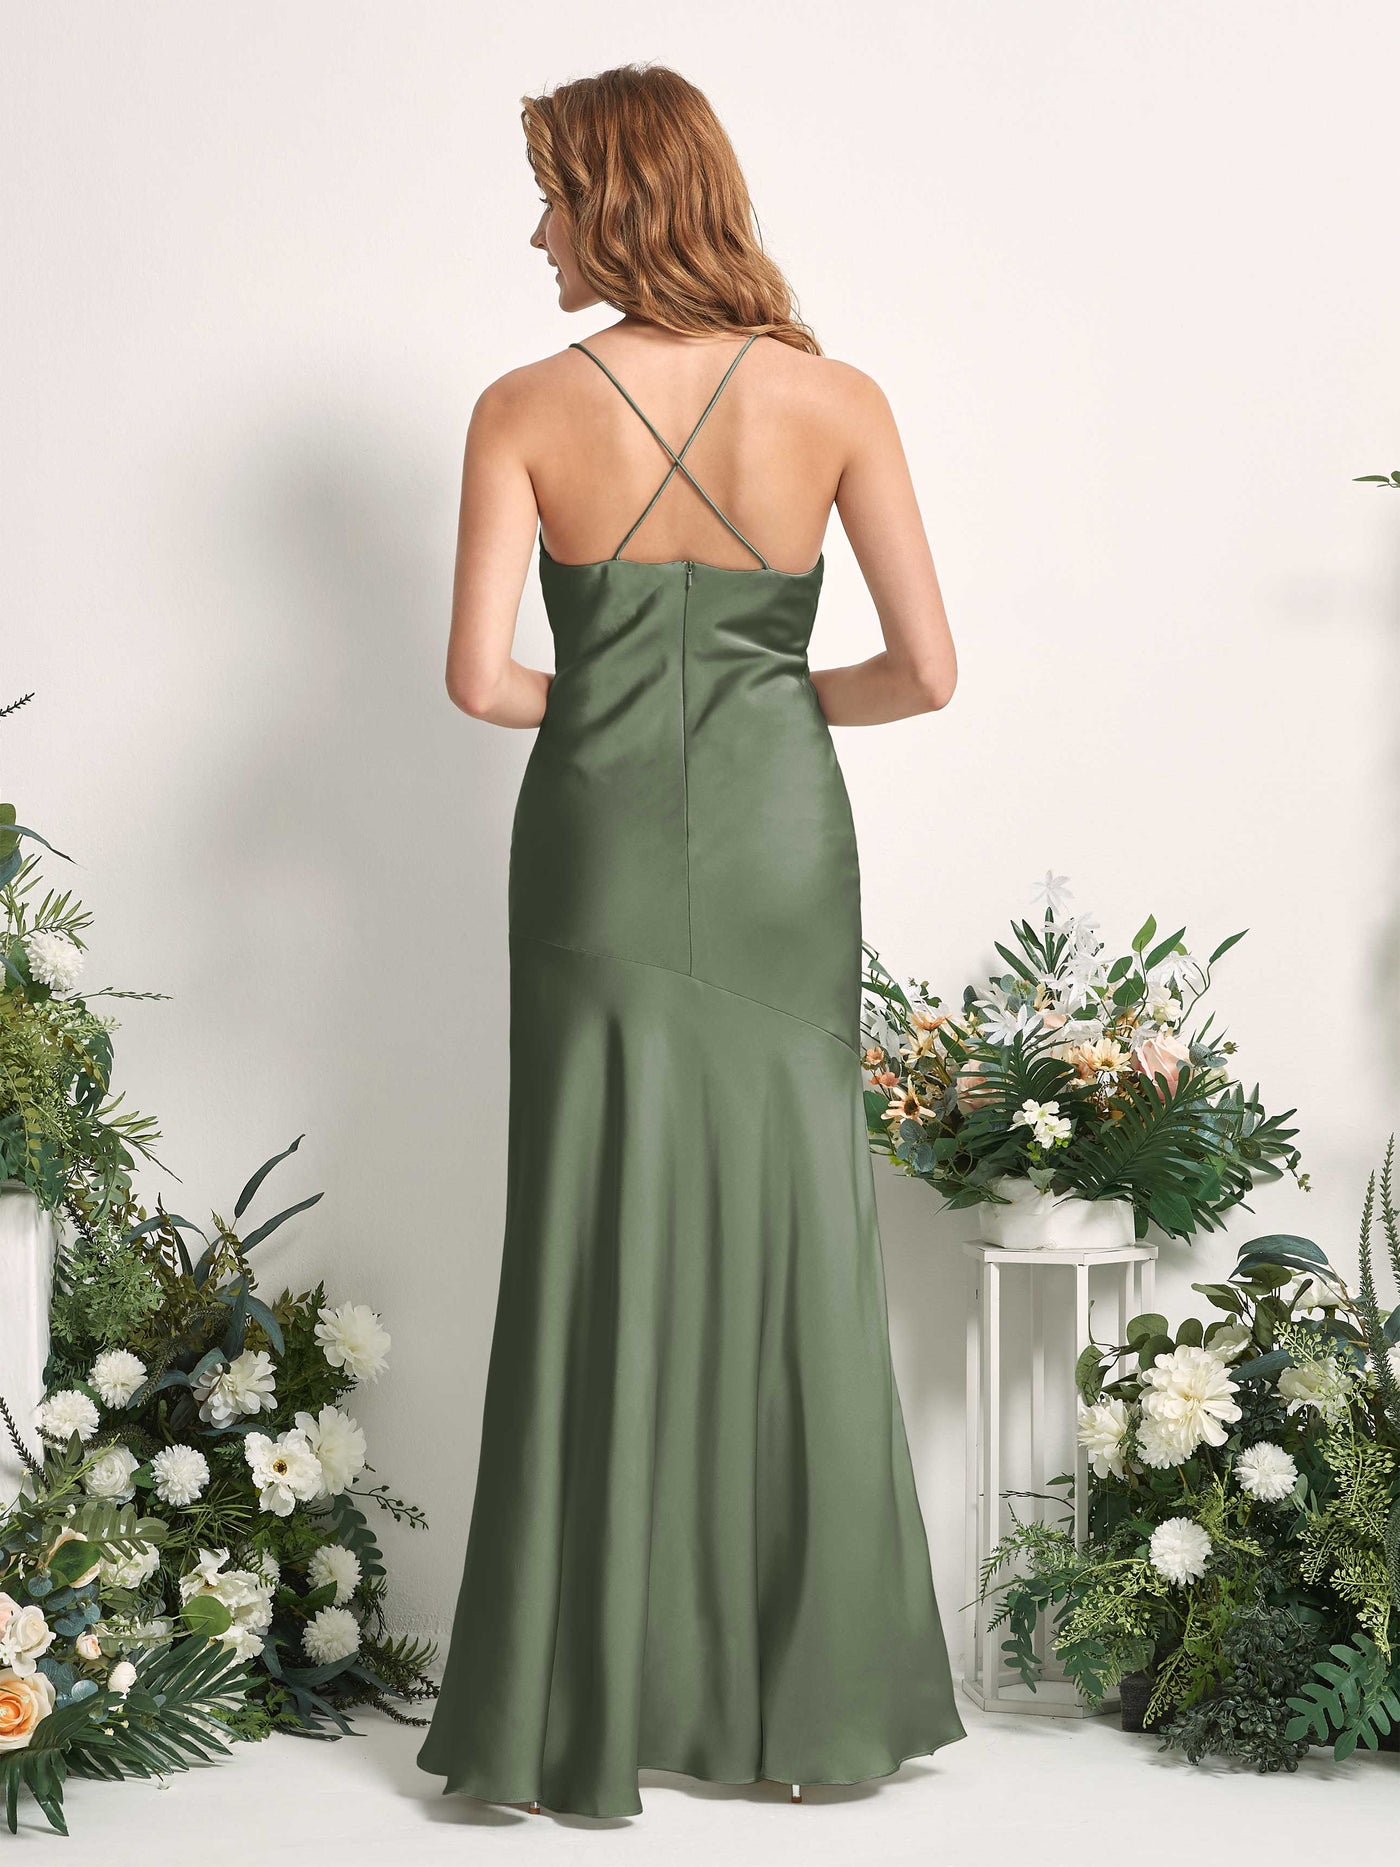 Green Olive Bridesmaid Dresses Bridesmaid Dress Mermaid/Trumpet Satin Spaghetti-straps High Low Sleeveless Wedding Party Dress (80226170)#color_green-olive